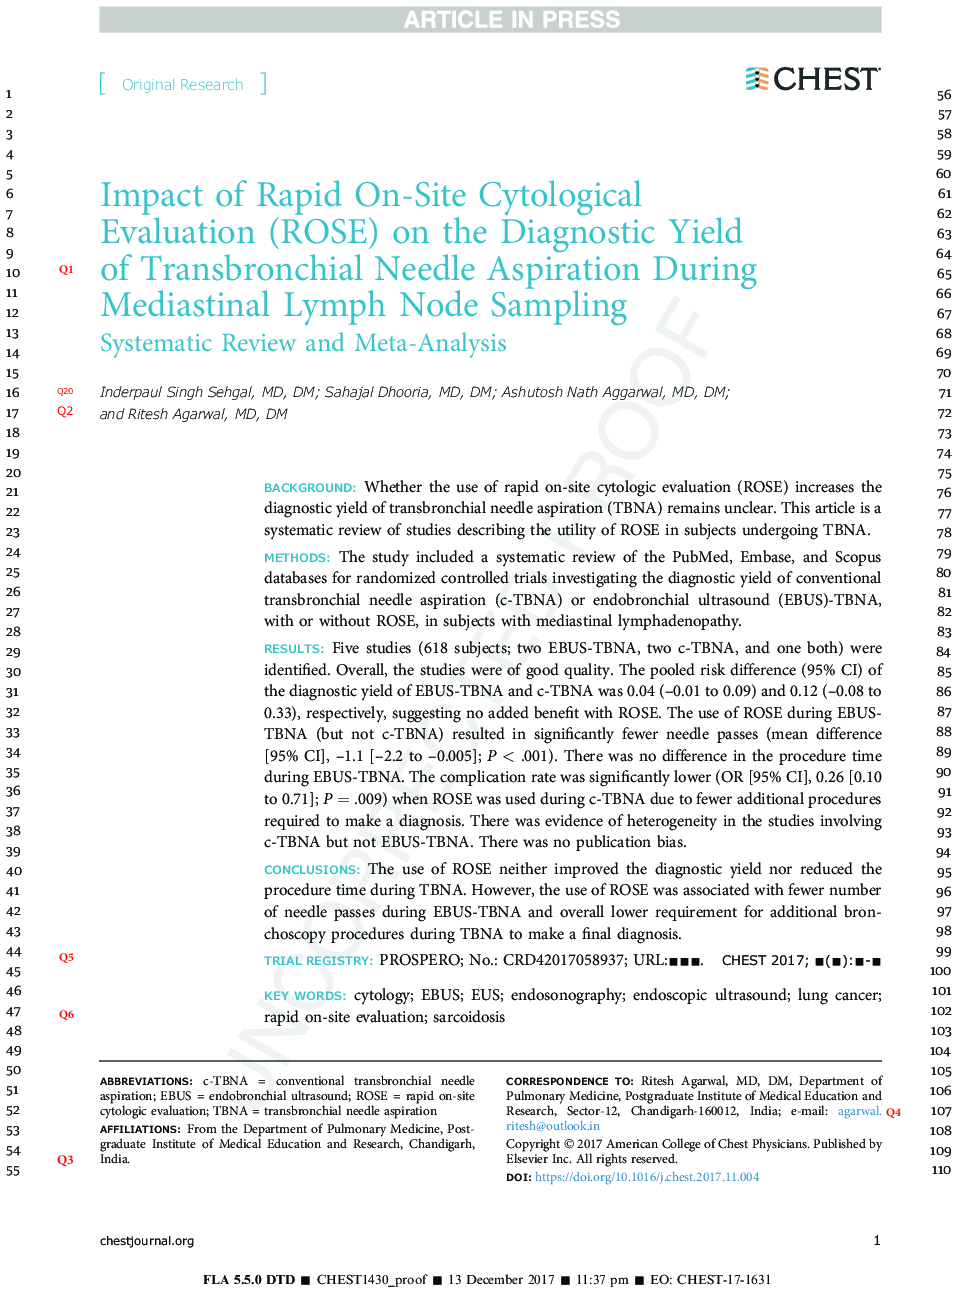 Impact of Rapid On-Site Cytological Evaluation (ROSE) on the Diagnostic Yield of Transbronchial Needle Aspiration During Mediastinal Lymph Node Sampling